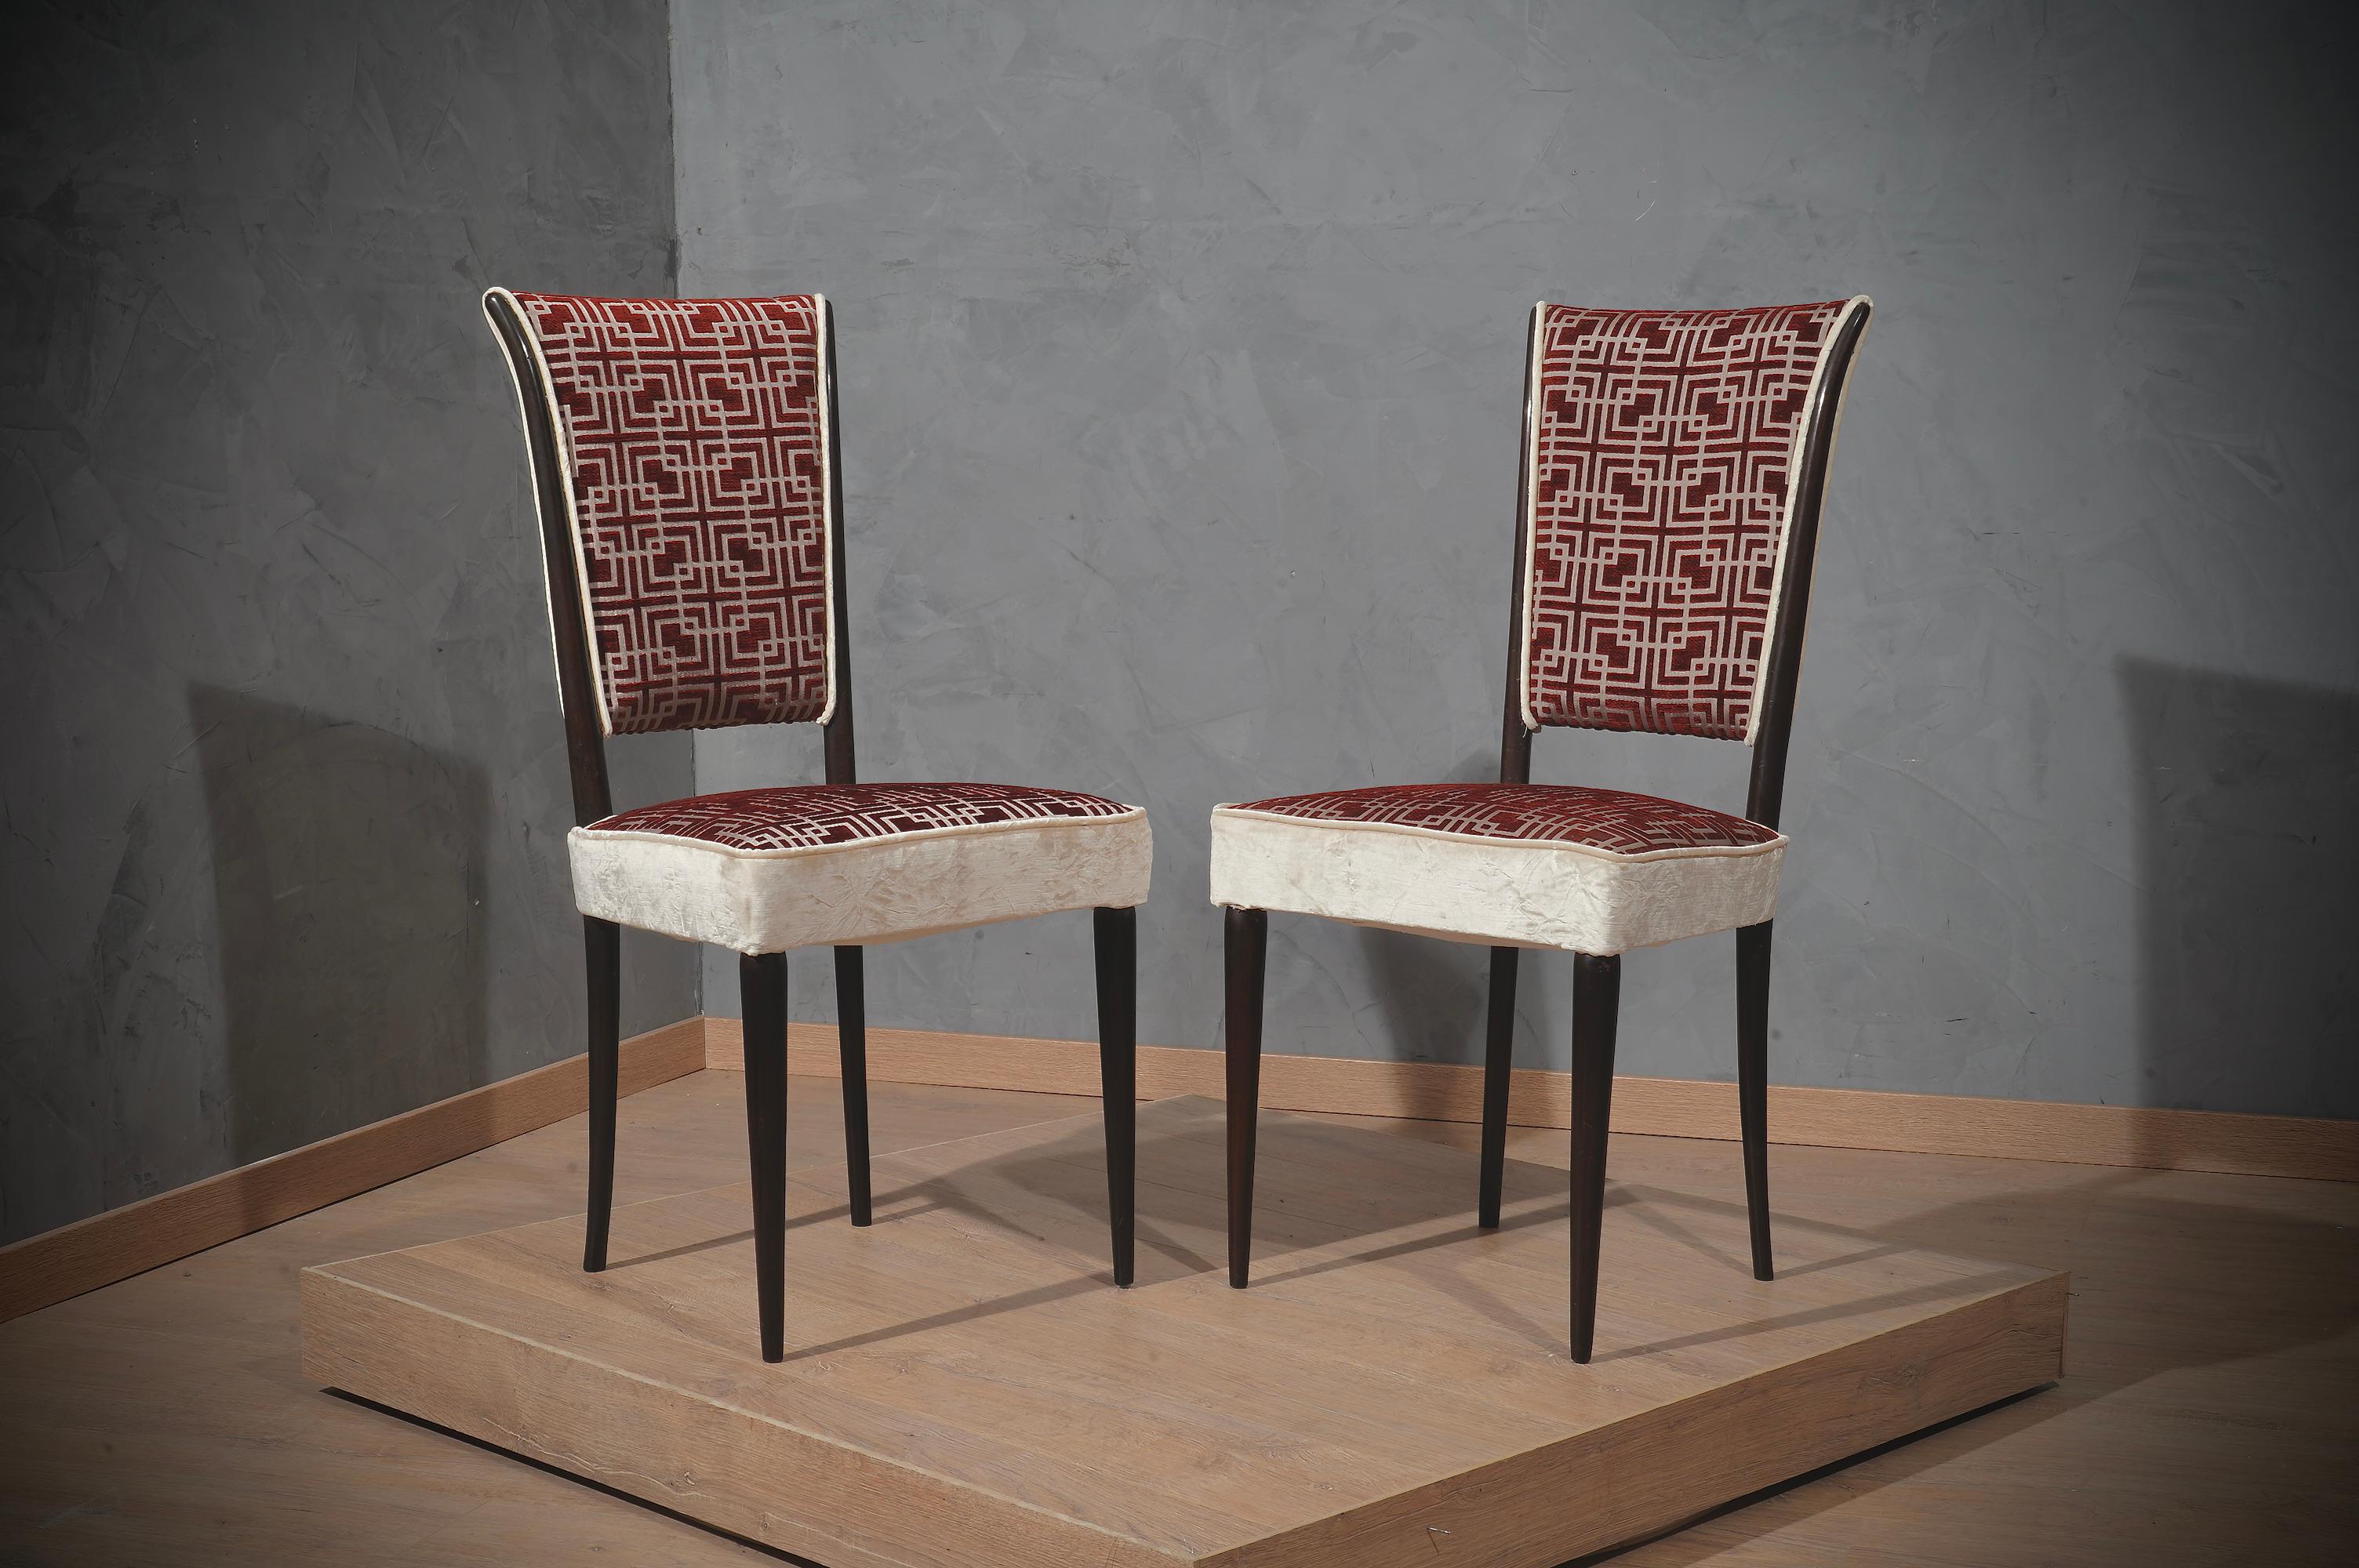 Beautiful chairs in characteristic Italian style of Osvaldo Borsani. Backrest of the chair with a very nice design and very rich fabric.

The chairs have a wooden structure and they have been well polished in dark shellac. Particularly the design of